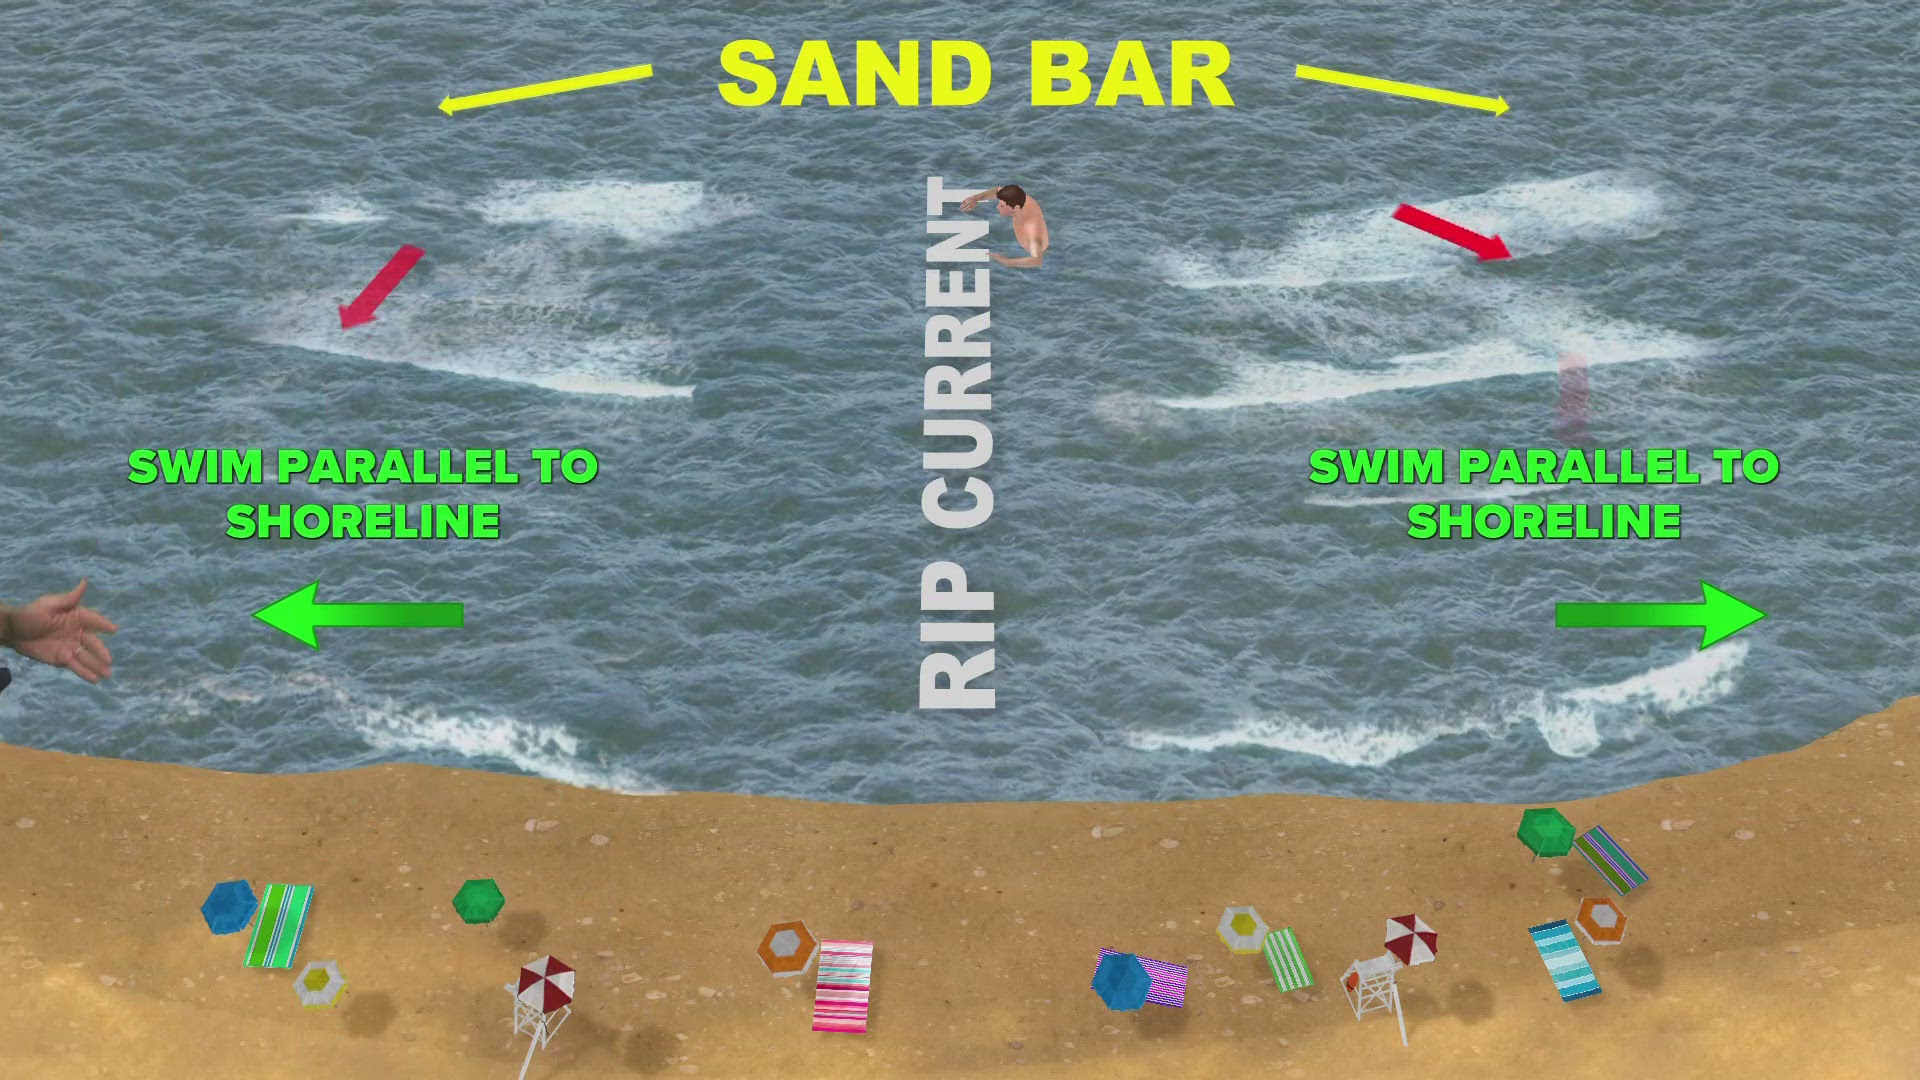 Here is what you should do if you get caught in a rip current.